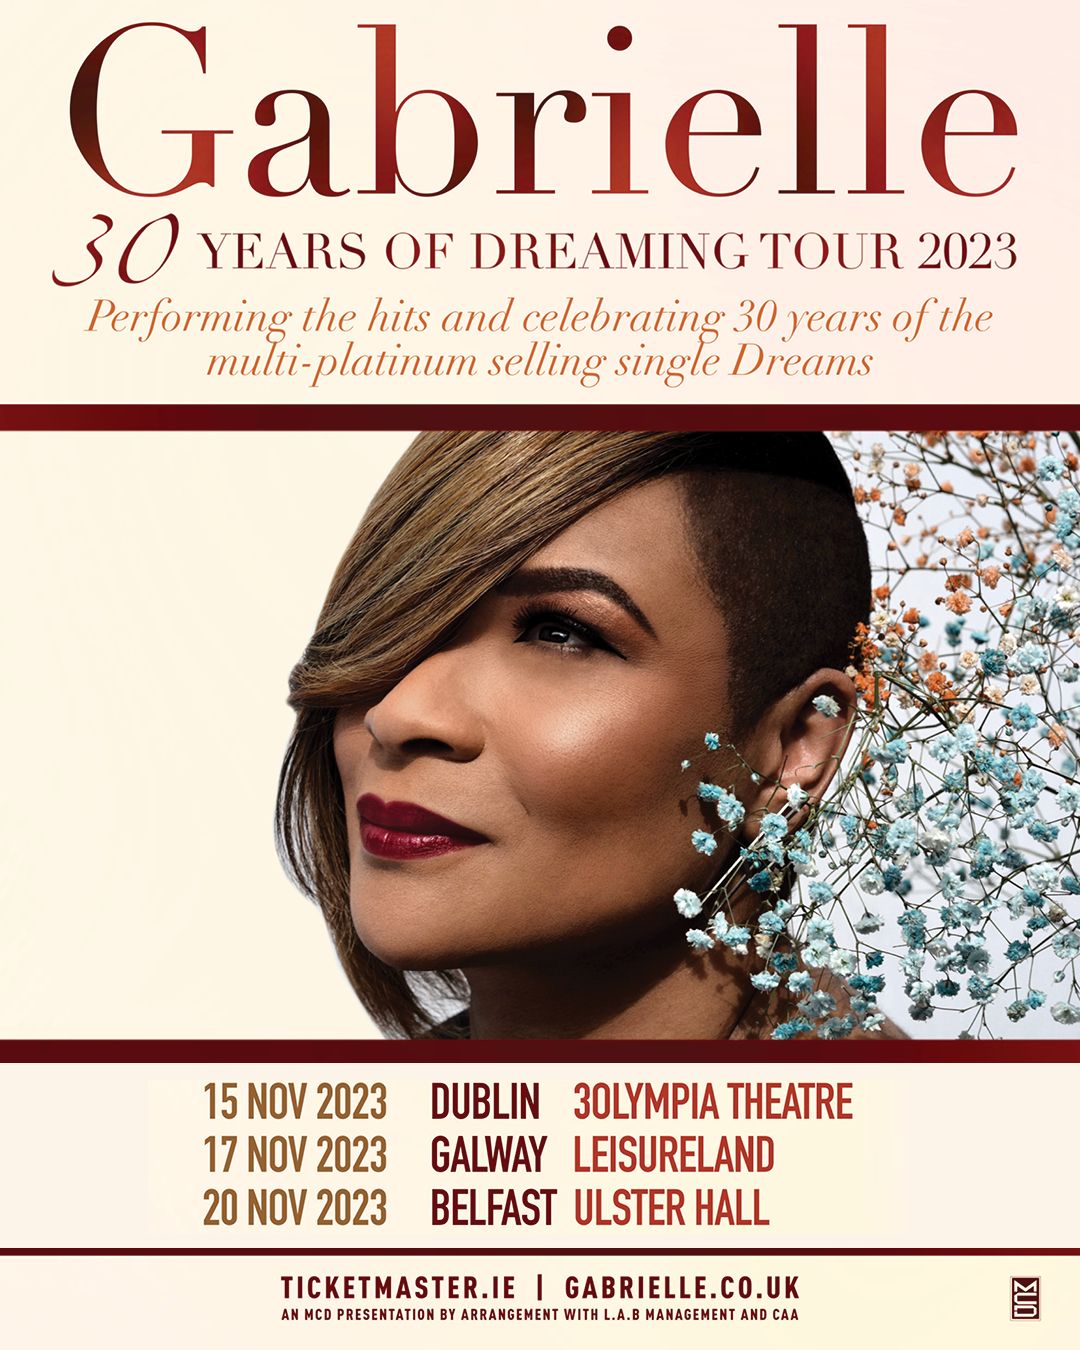 GABRIELLE THE 30 YEARS OF DREAMING TOUR